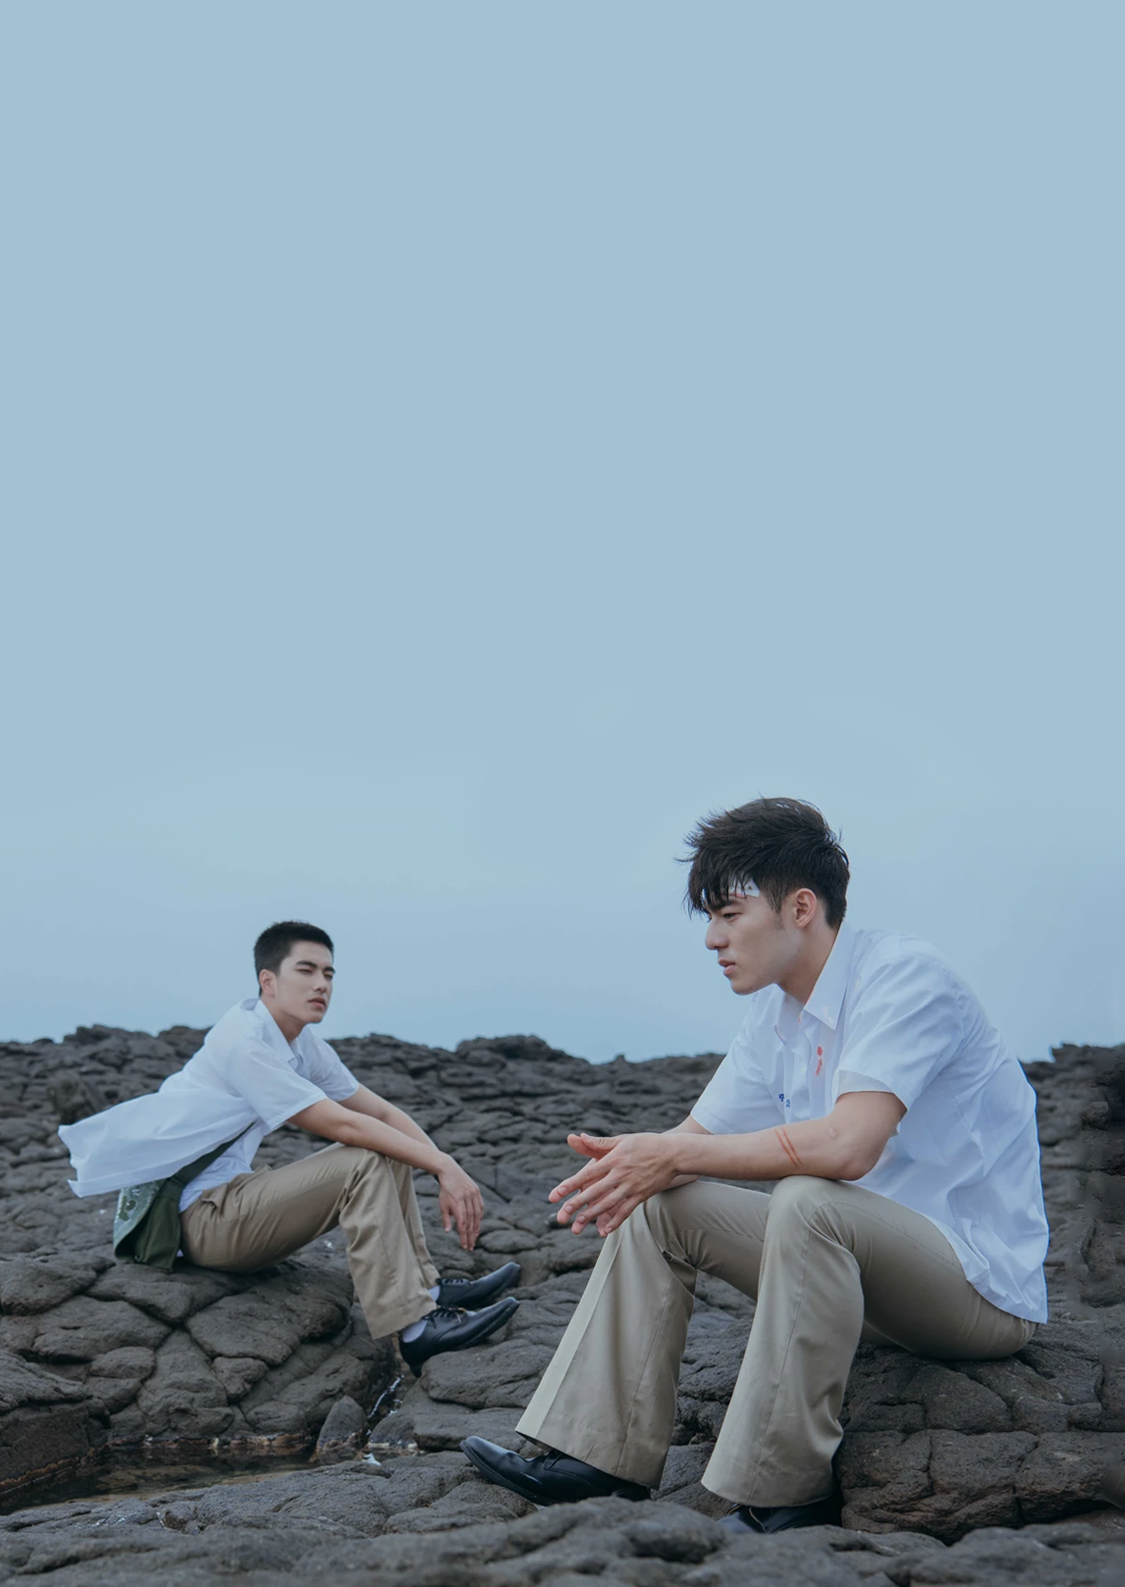 Tseng Ching-hua as Birdy and Edward Chen as Chang Jia-han sit on rocks by the beach in &quot;Your Name Engraved Herein&quot;